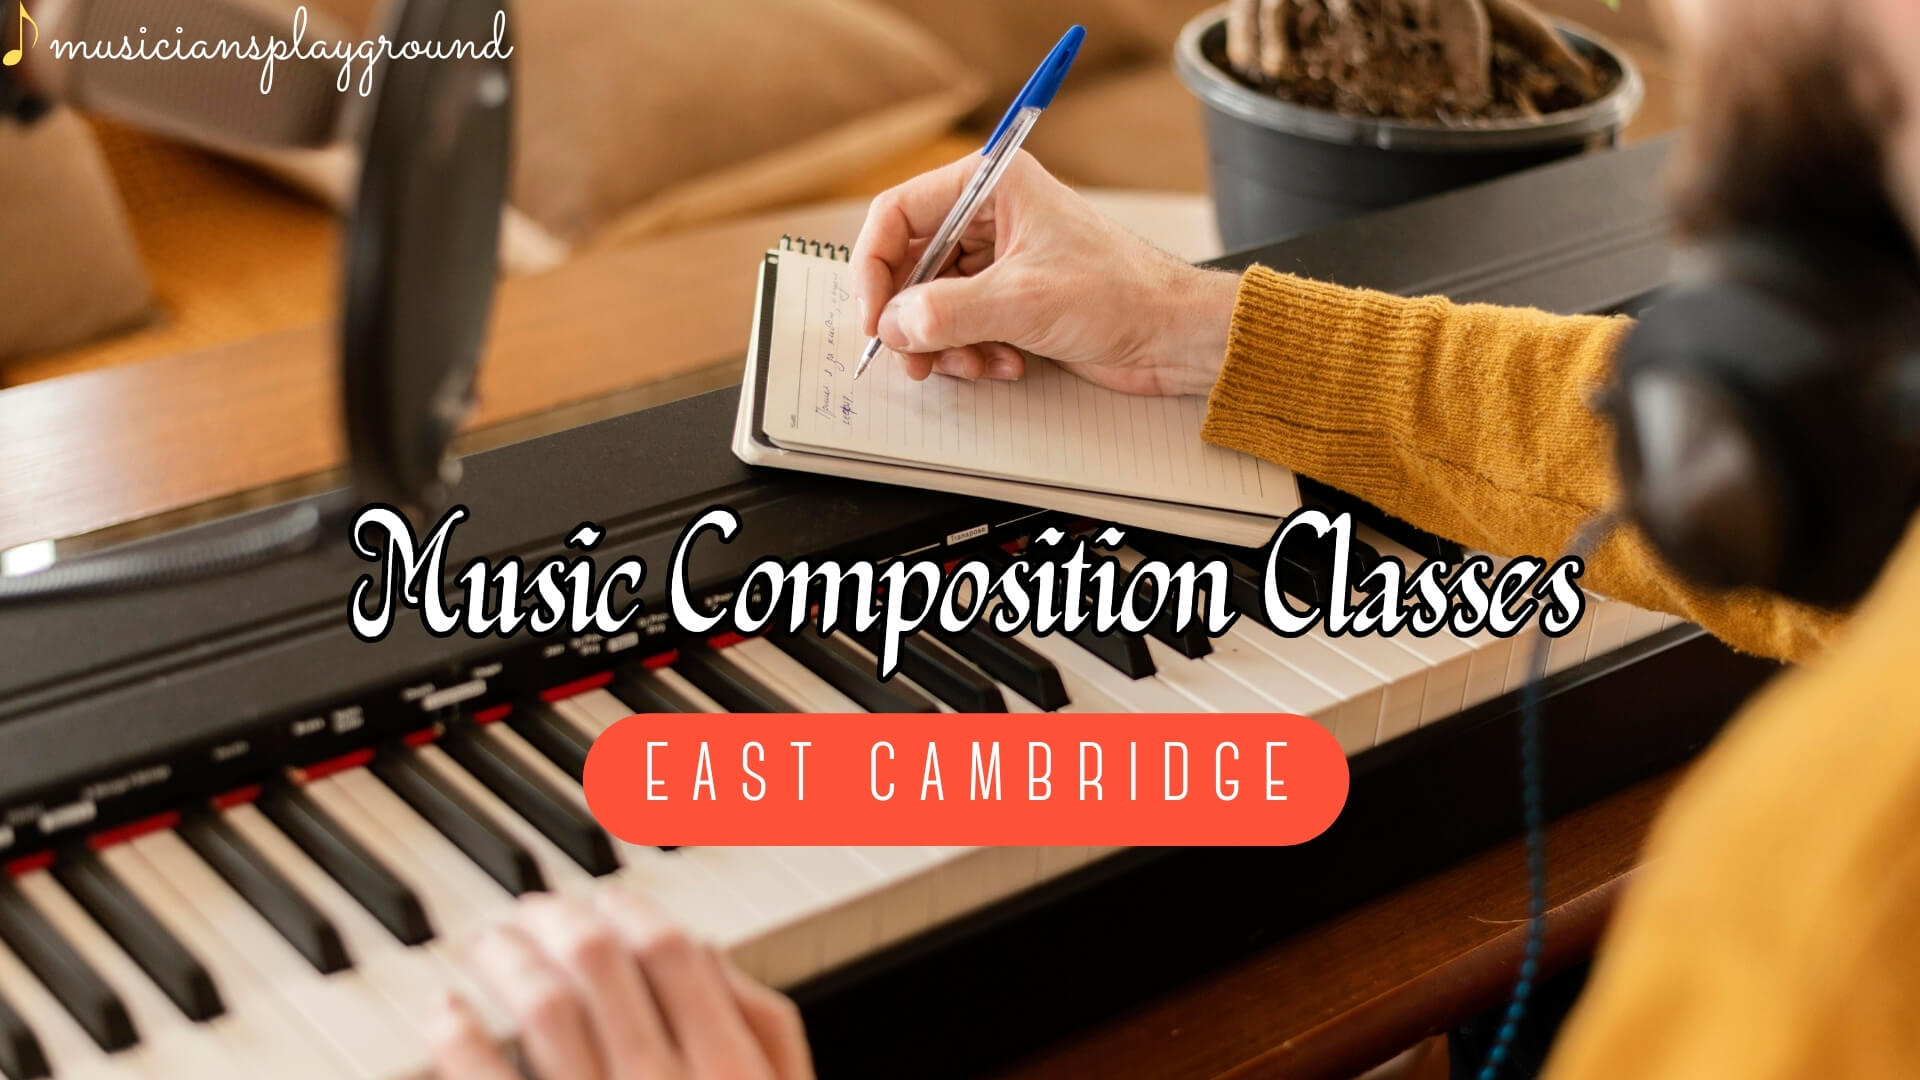 Welcome to East Cambridge: The Perfect Destination for Music Composition Classes